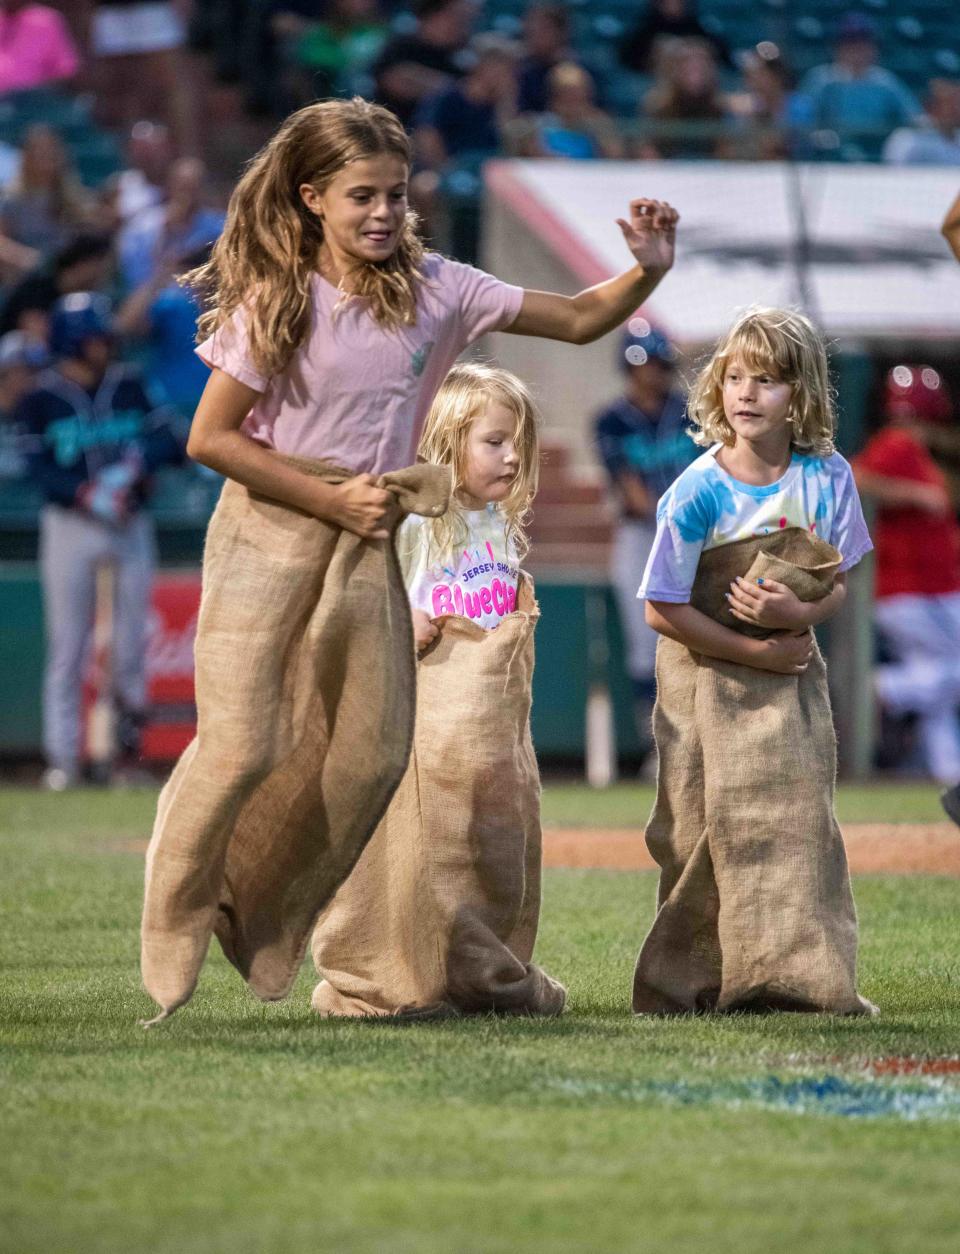 Potato sack races at the Jersey Shore Blue Claws game.